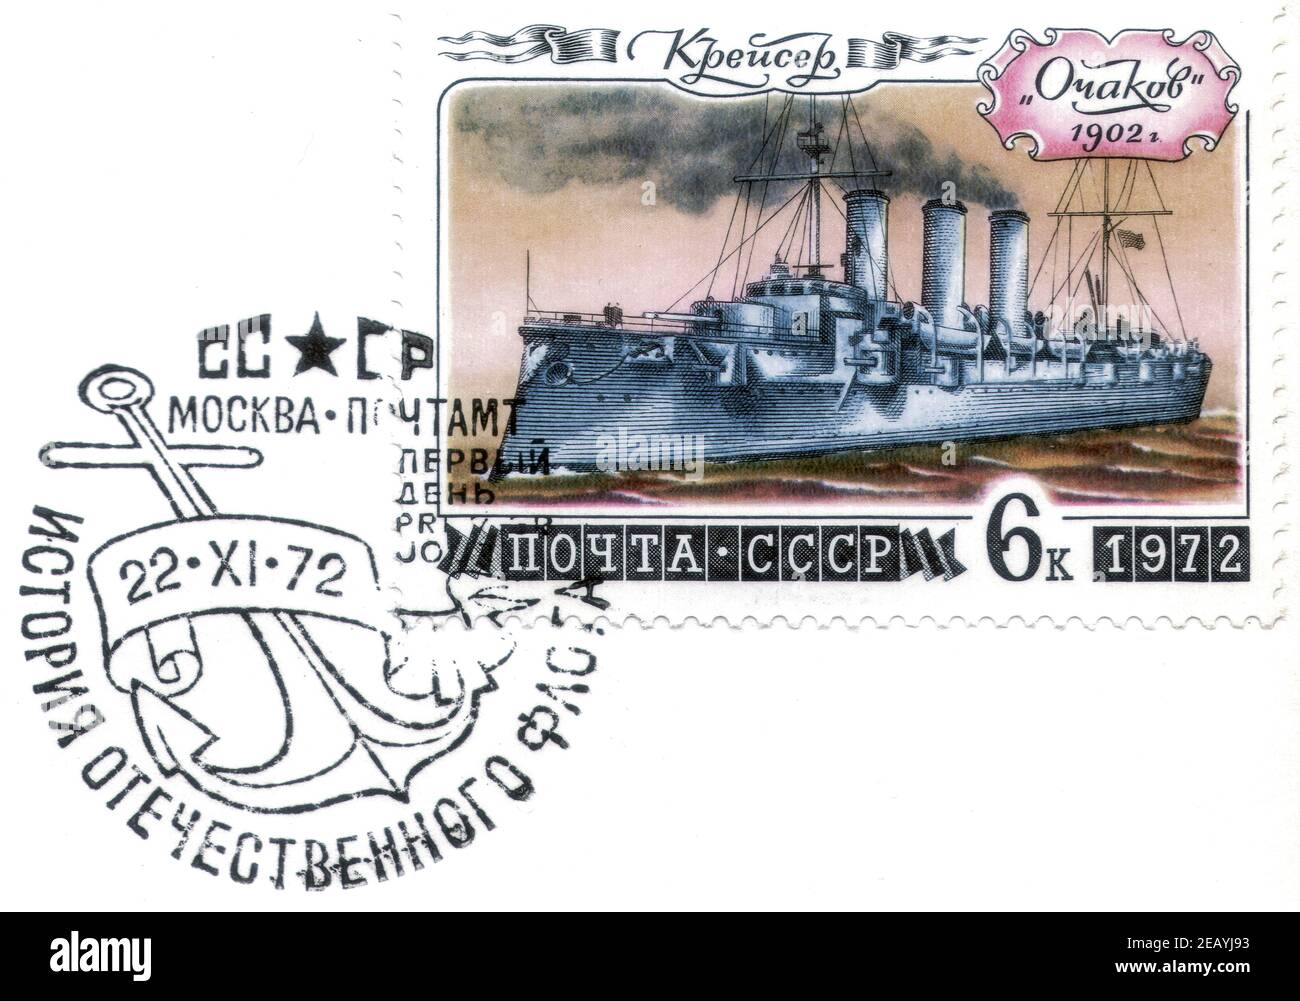 Saint Petersburg, Russia - February 07, 2020: First-day stamp issued in the Soviet Union with the image of the Cruiser Ochakov, 1902, circa 1972 Stock Photo